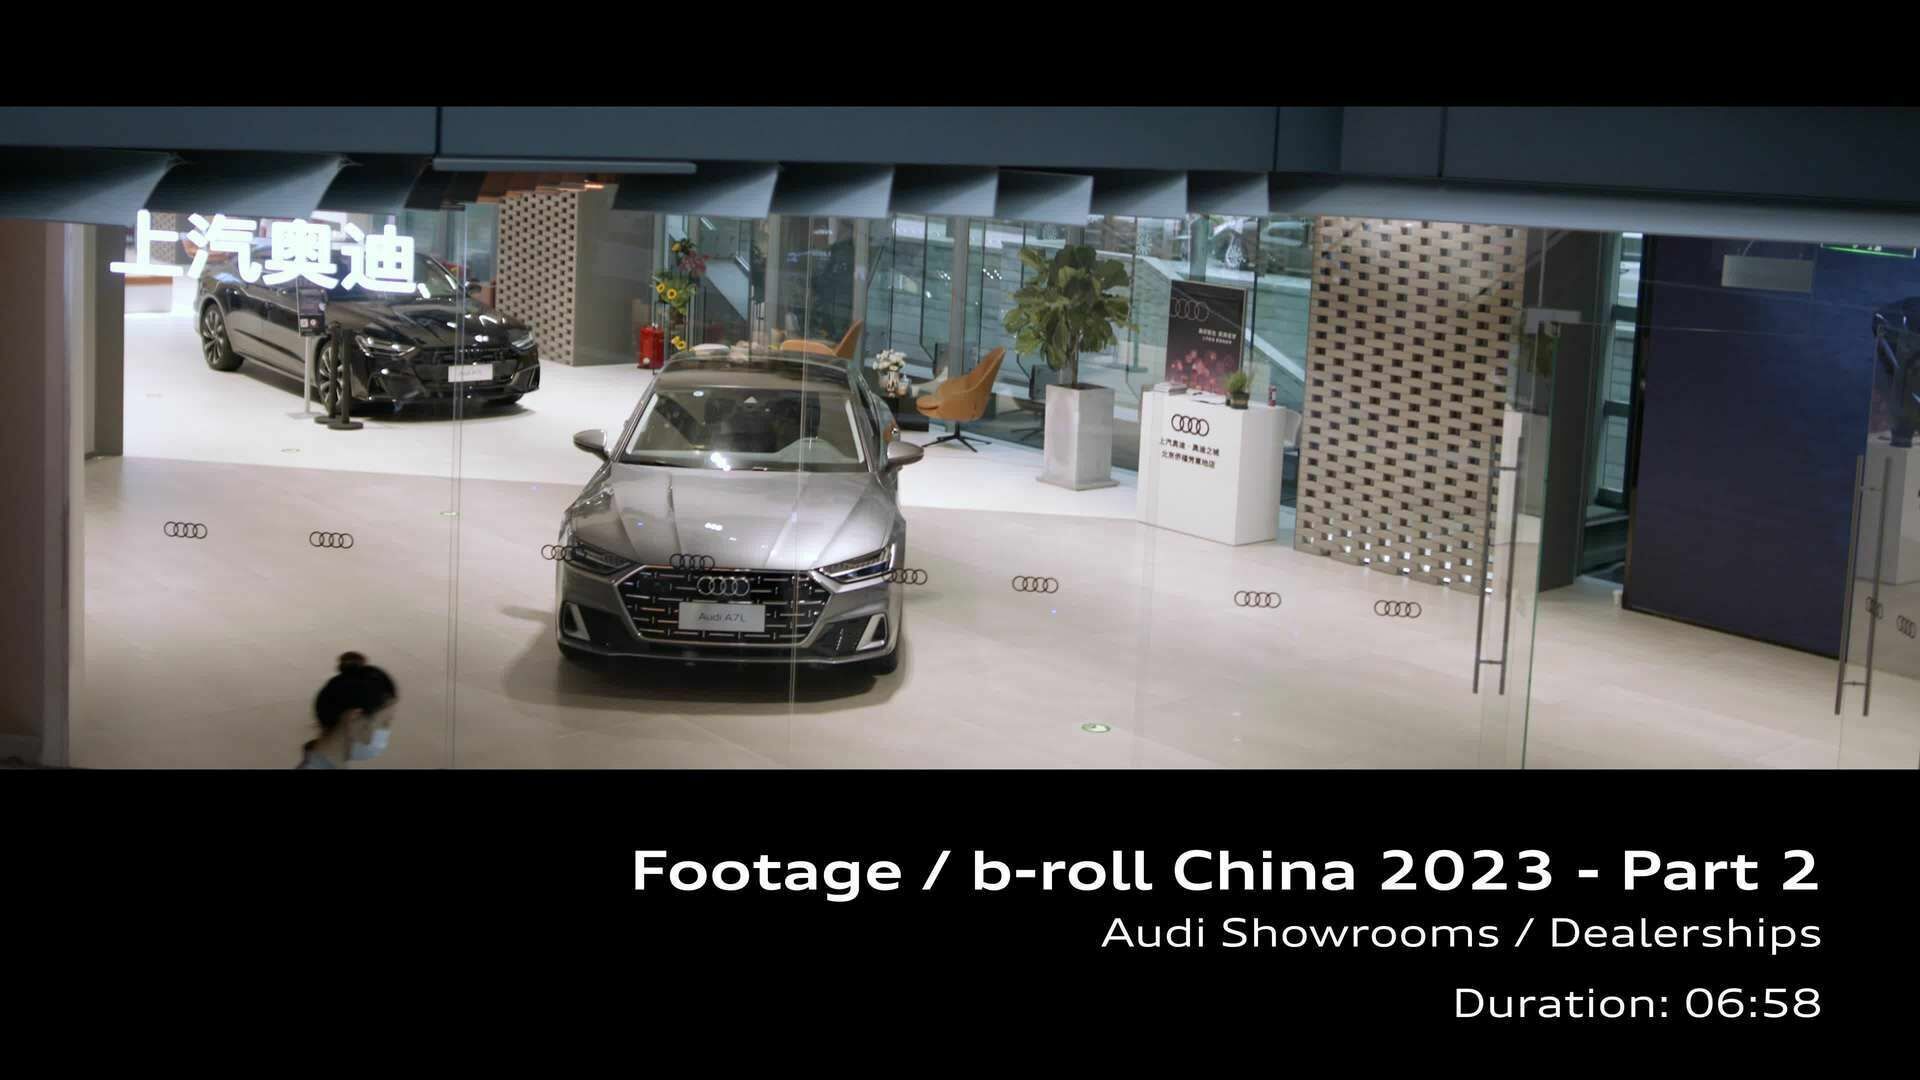 Footage: Auto China - Showrooms & Dealerships